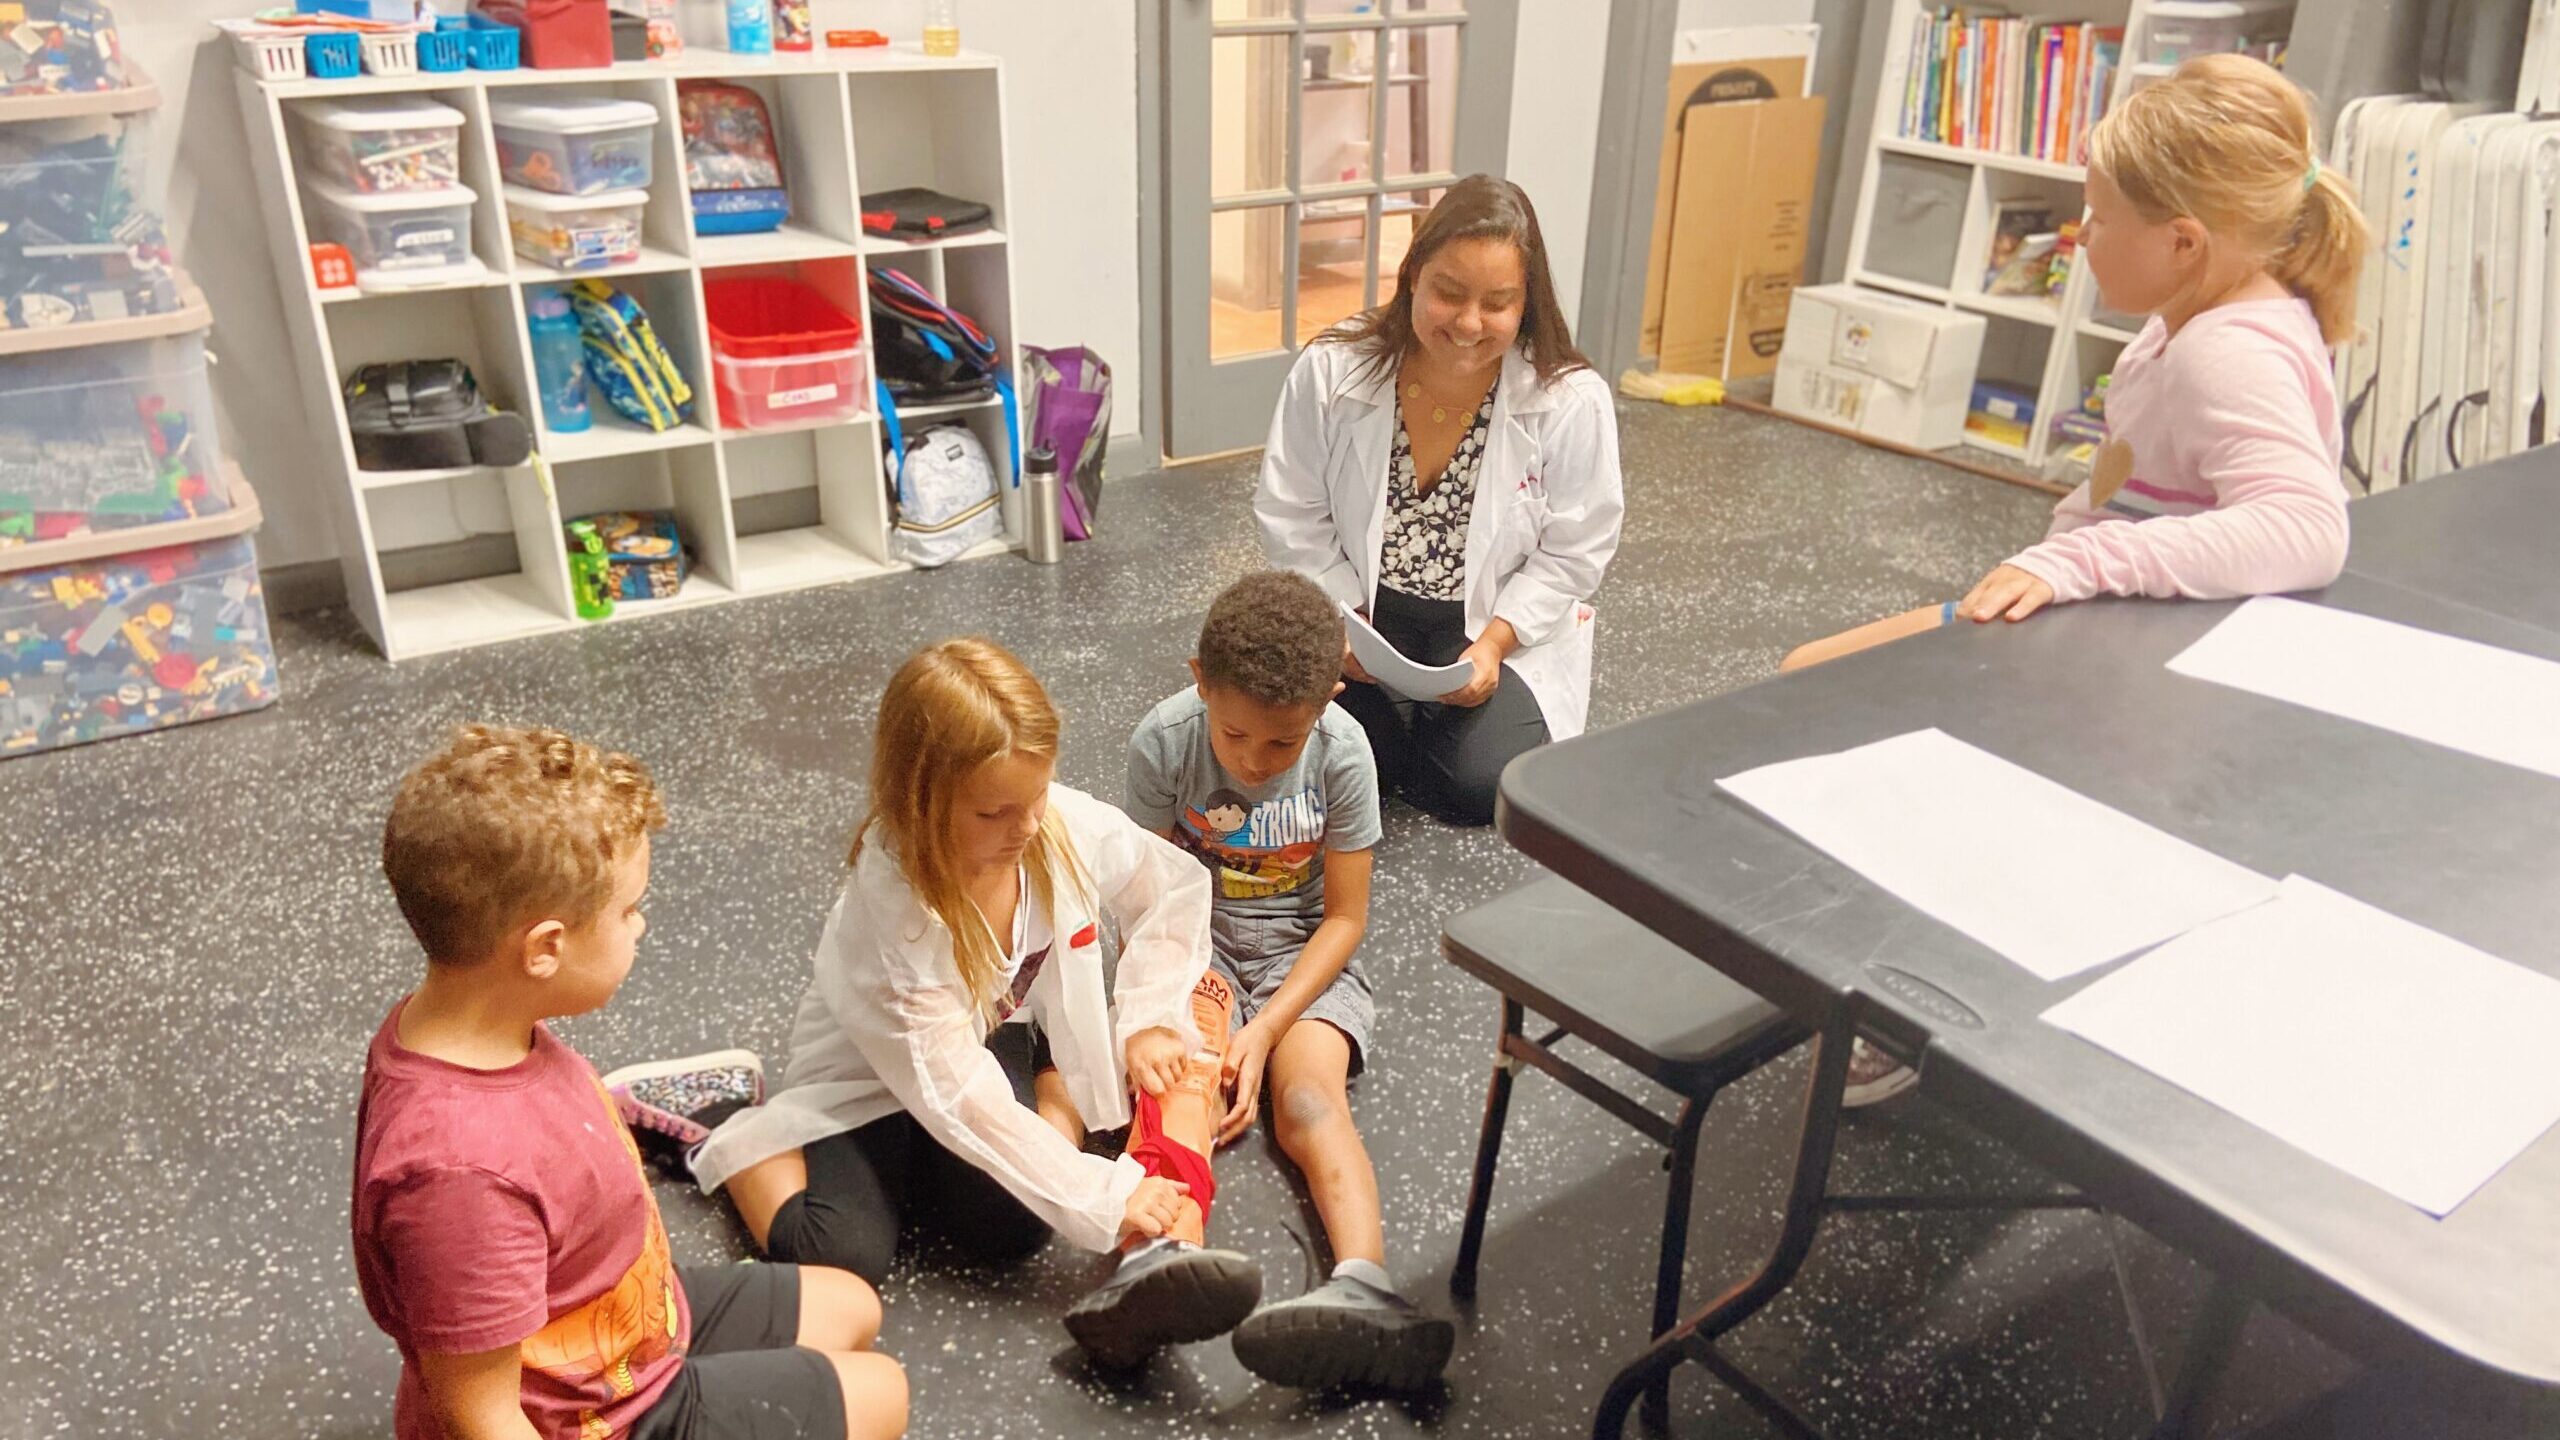 Little Medical School of the Treasure Coast offers weekend events and weekend classes for kids in STEM throughout Port St Lucie.